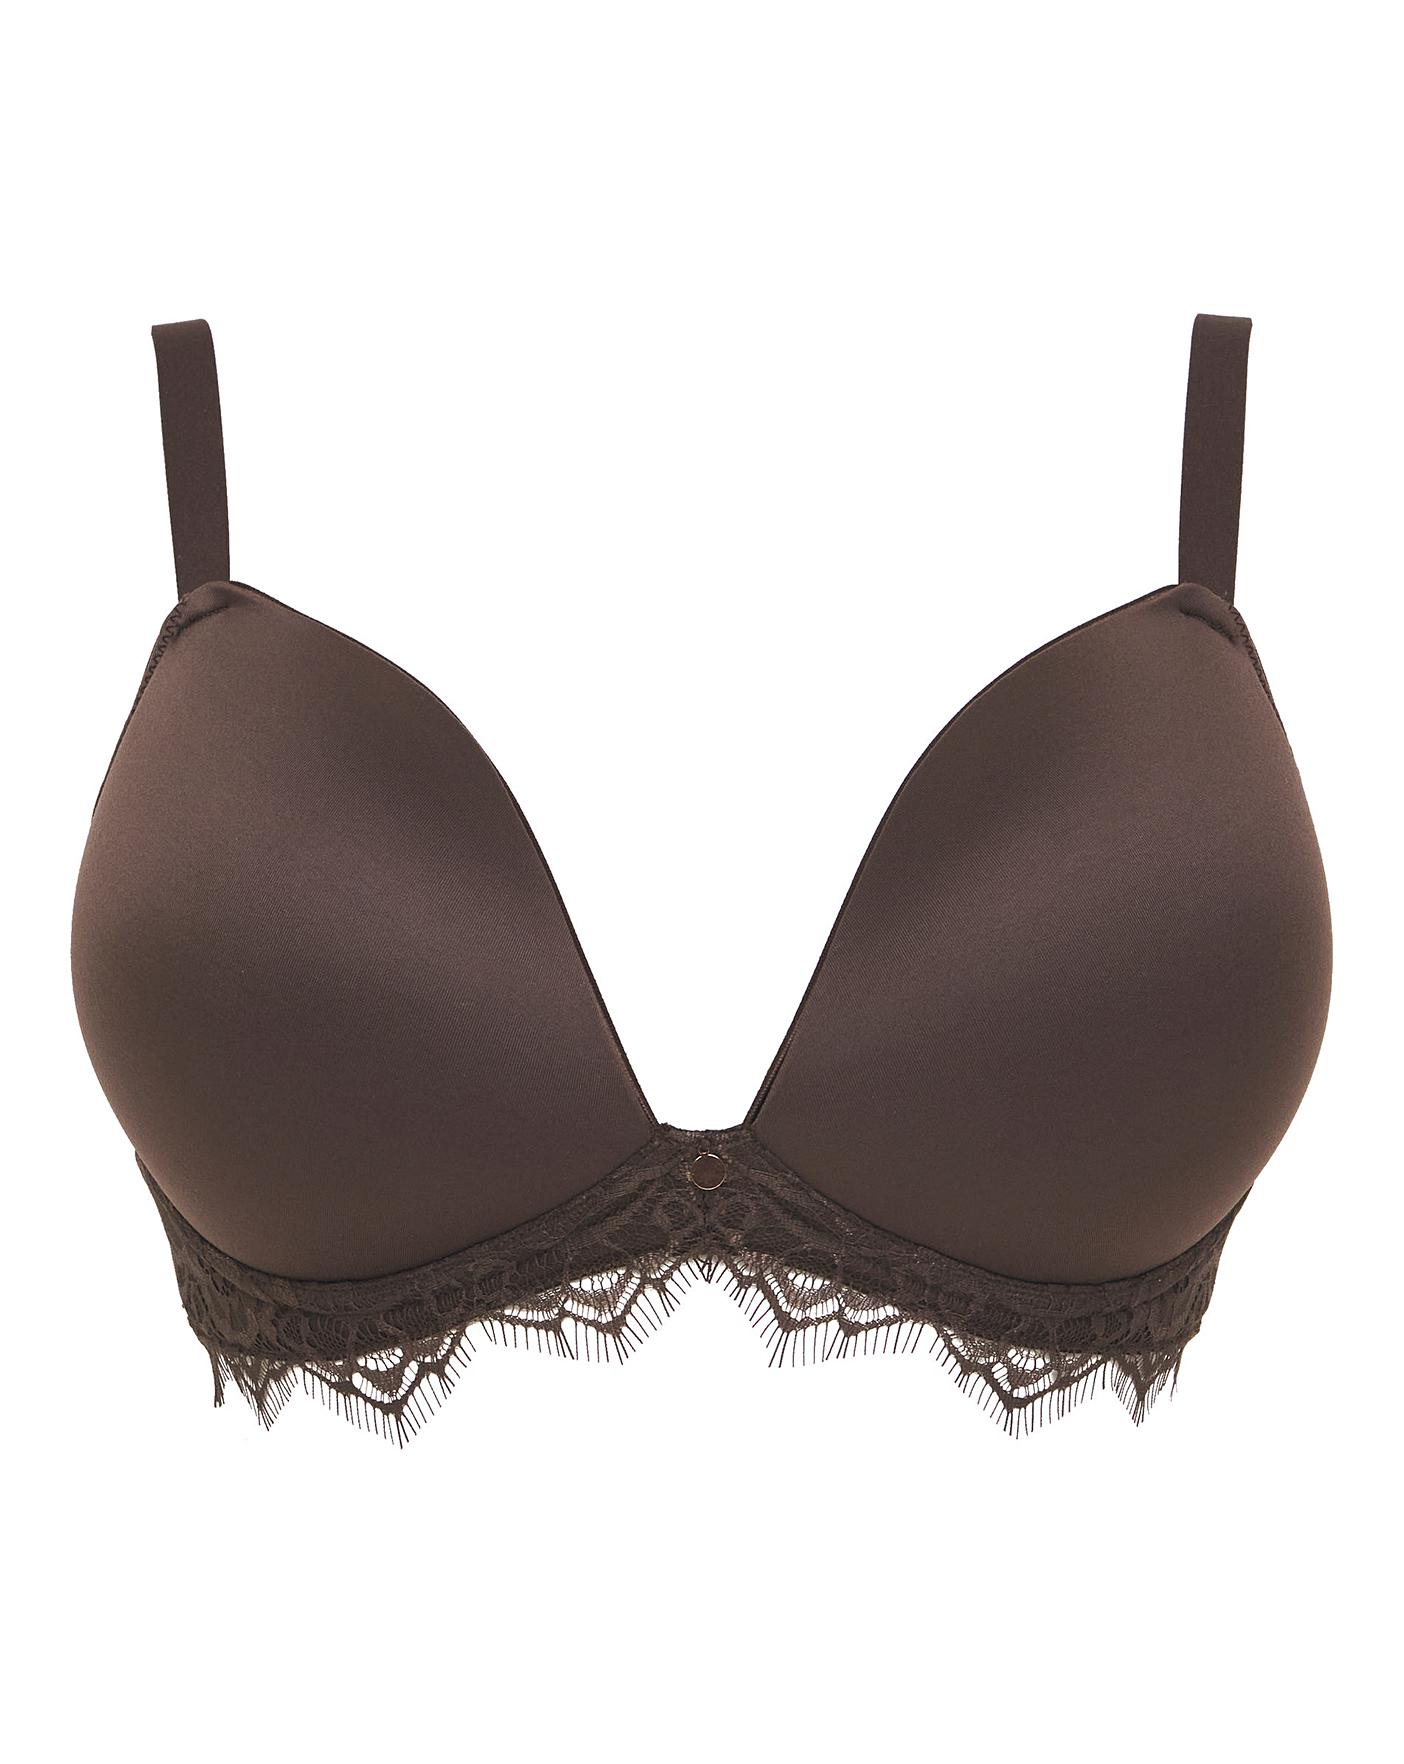 Smoothing Non Wired Padded Bra With Lace Detail